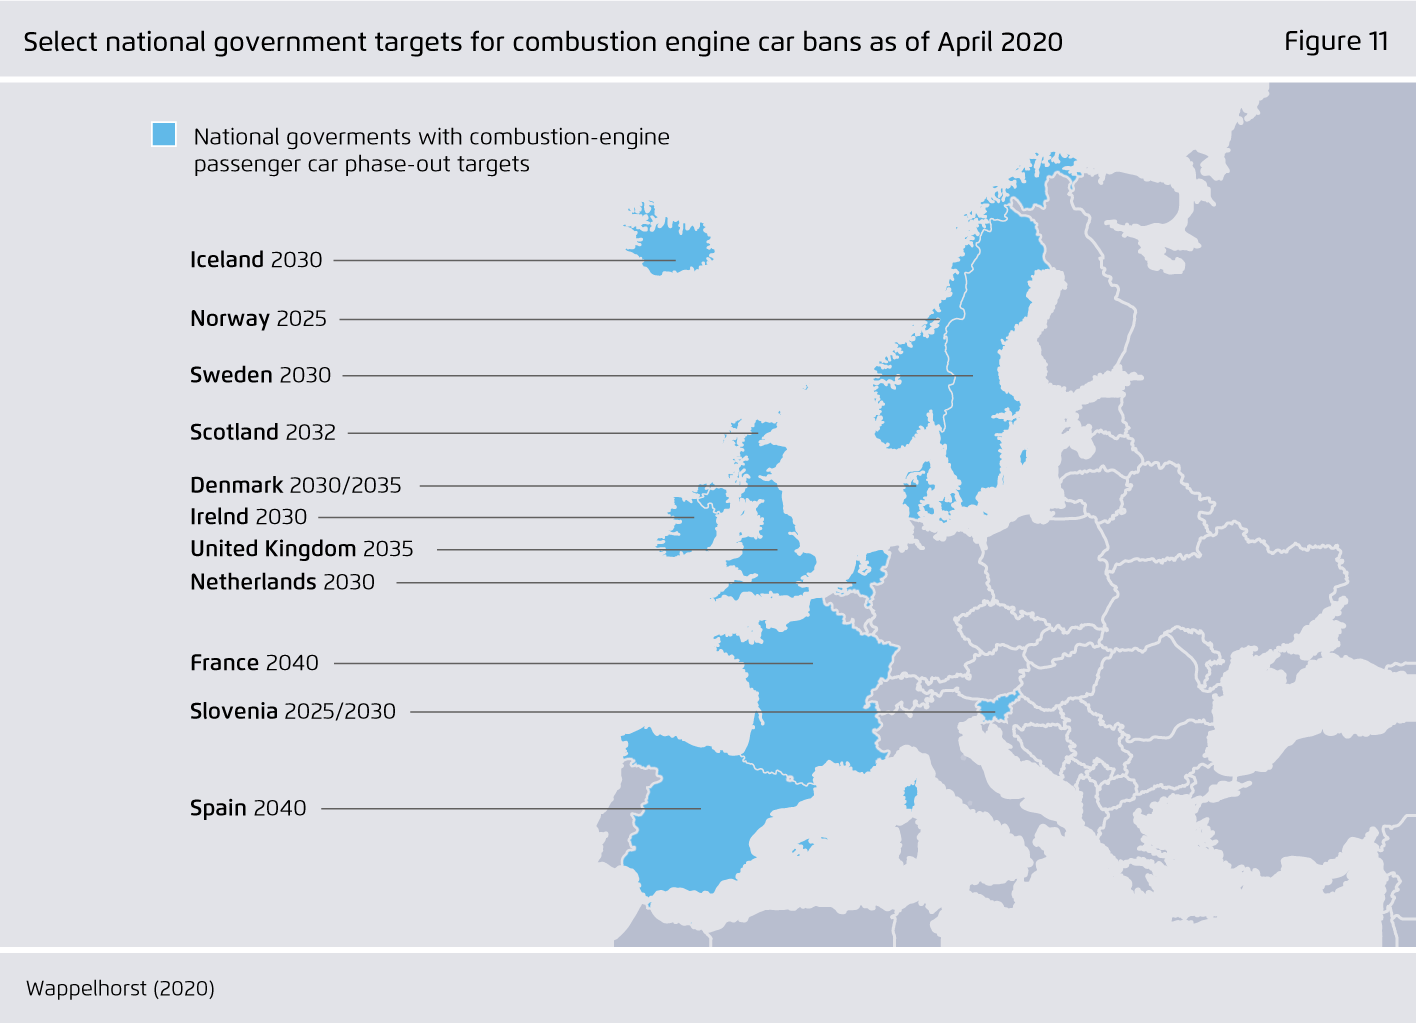 Preview for Select national government targets for combustion engine car bans as of April 2020